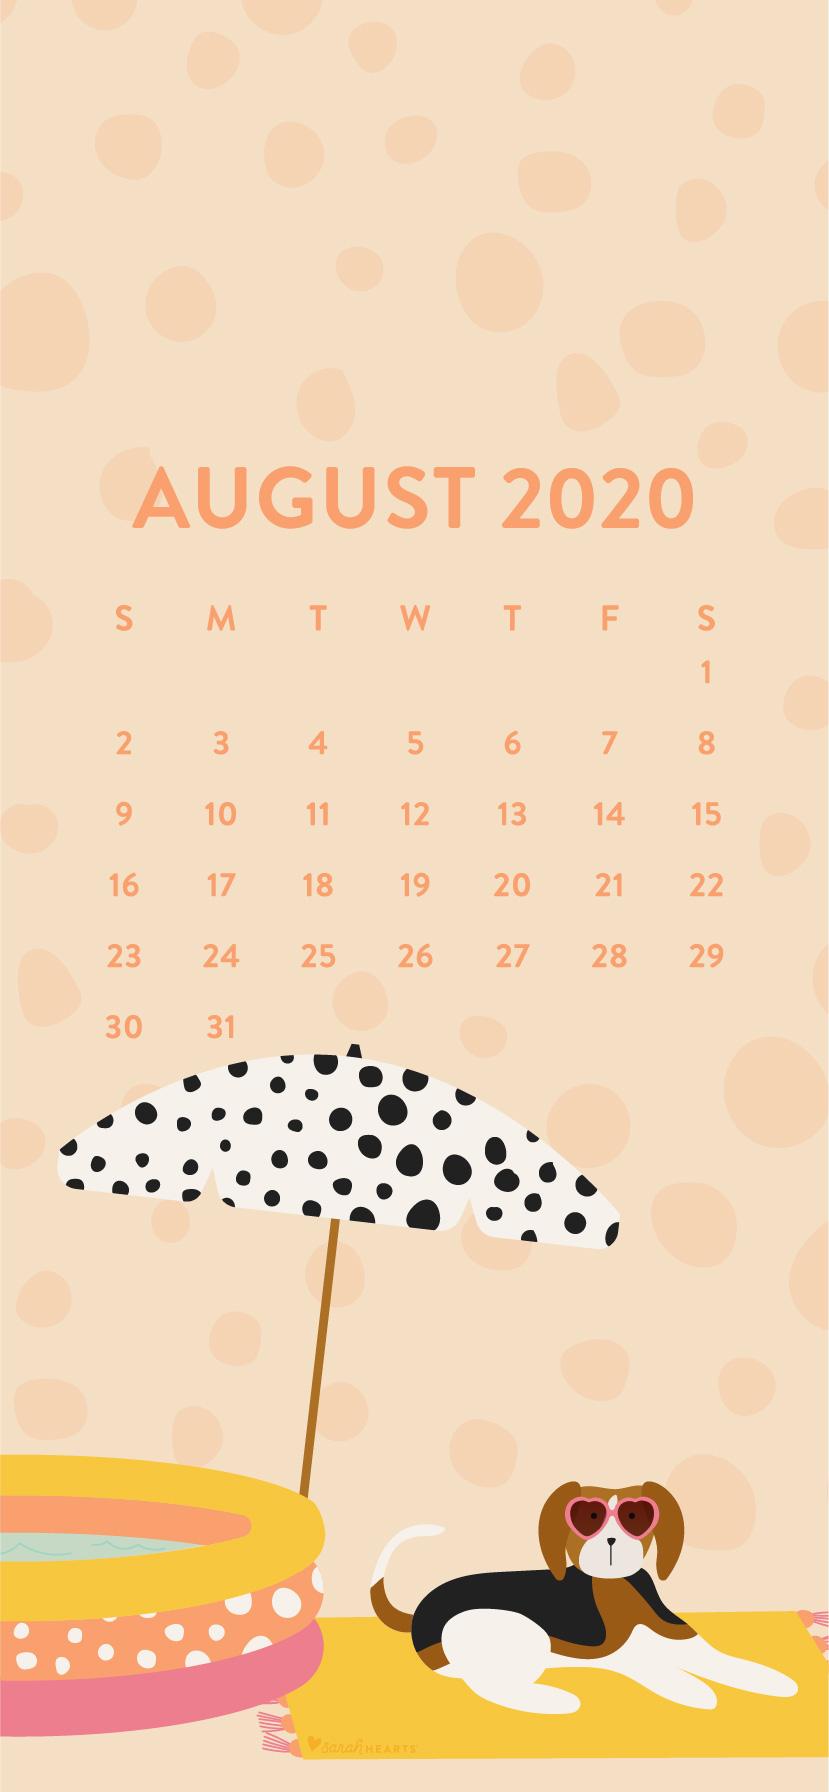 August dog and pool calendar wallpaper